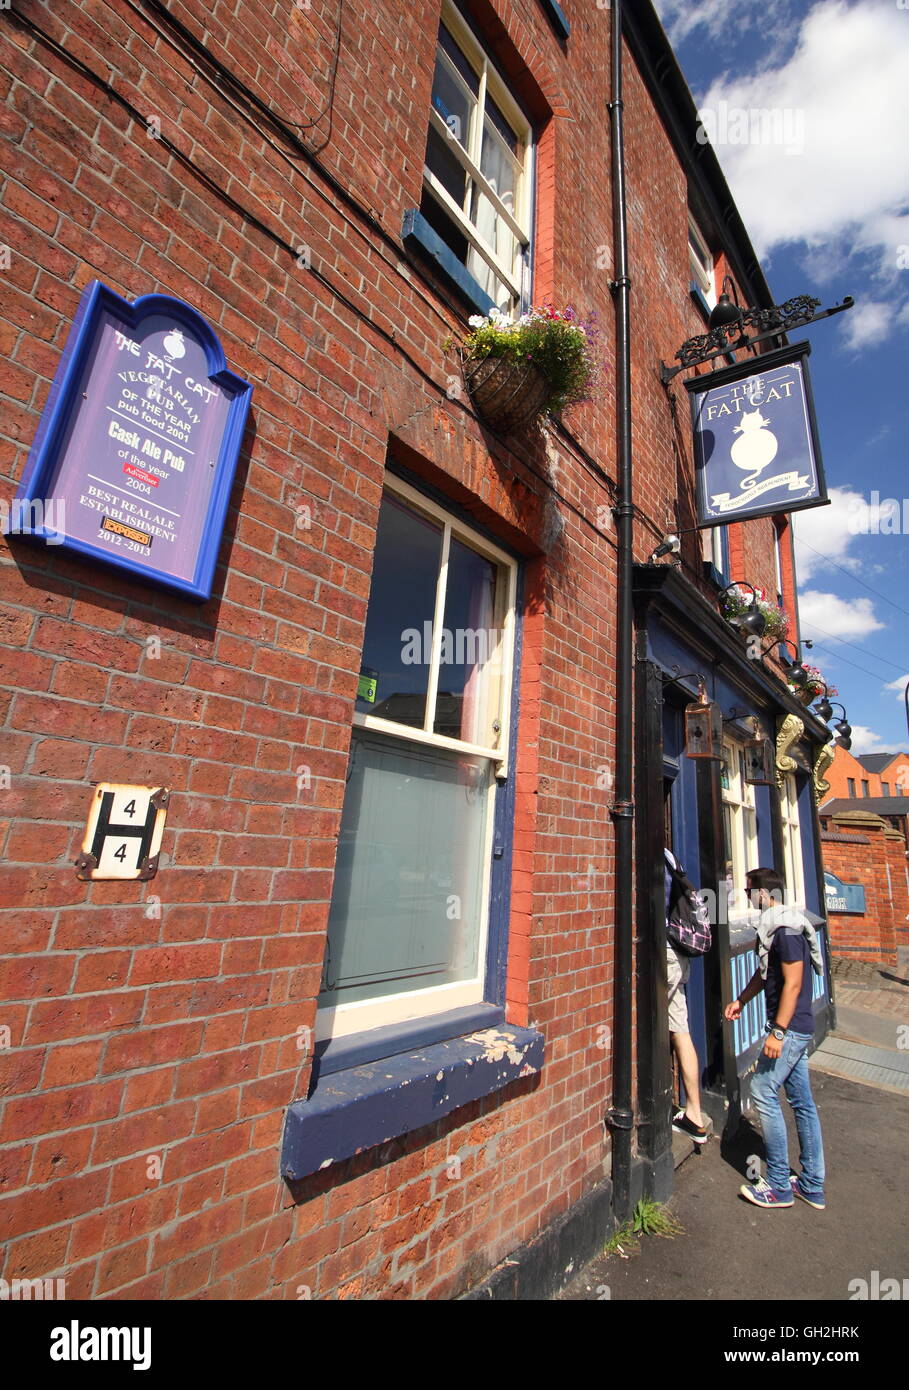 People enter the Fat Cat public house on Alma Street in the Kelham Island area of Sheffield, South Yorkshire Northern England,UK Stock Photo